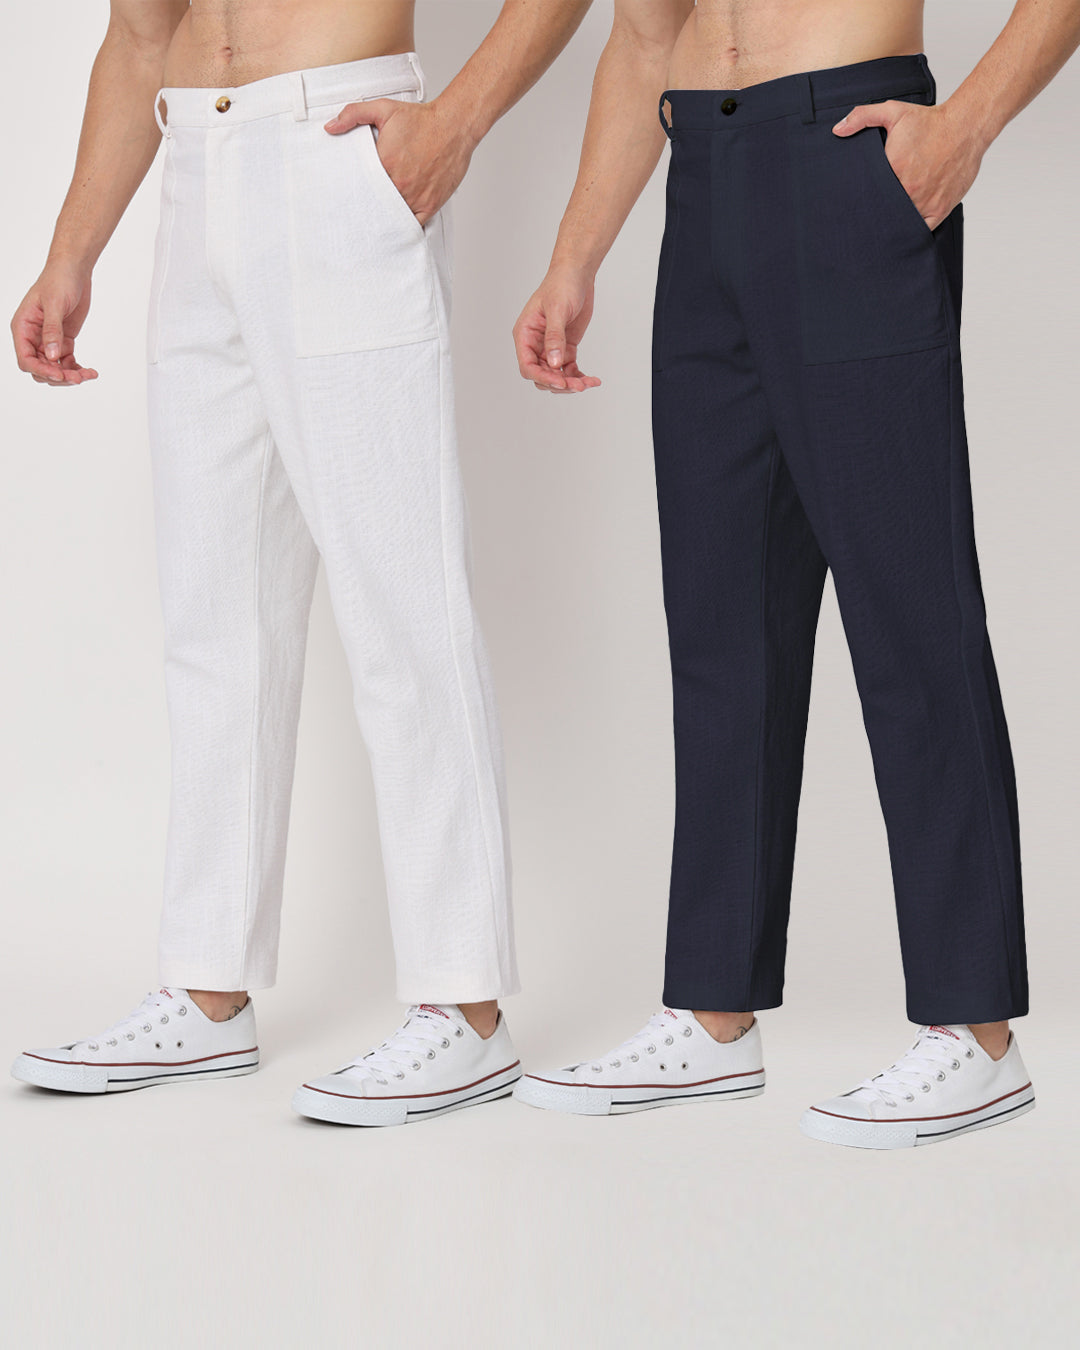 Combo : Comfy Ease White & Midnight Blue Men's Pants - Set of 2